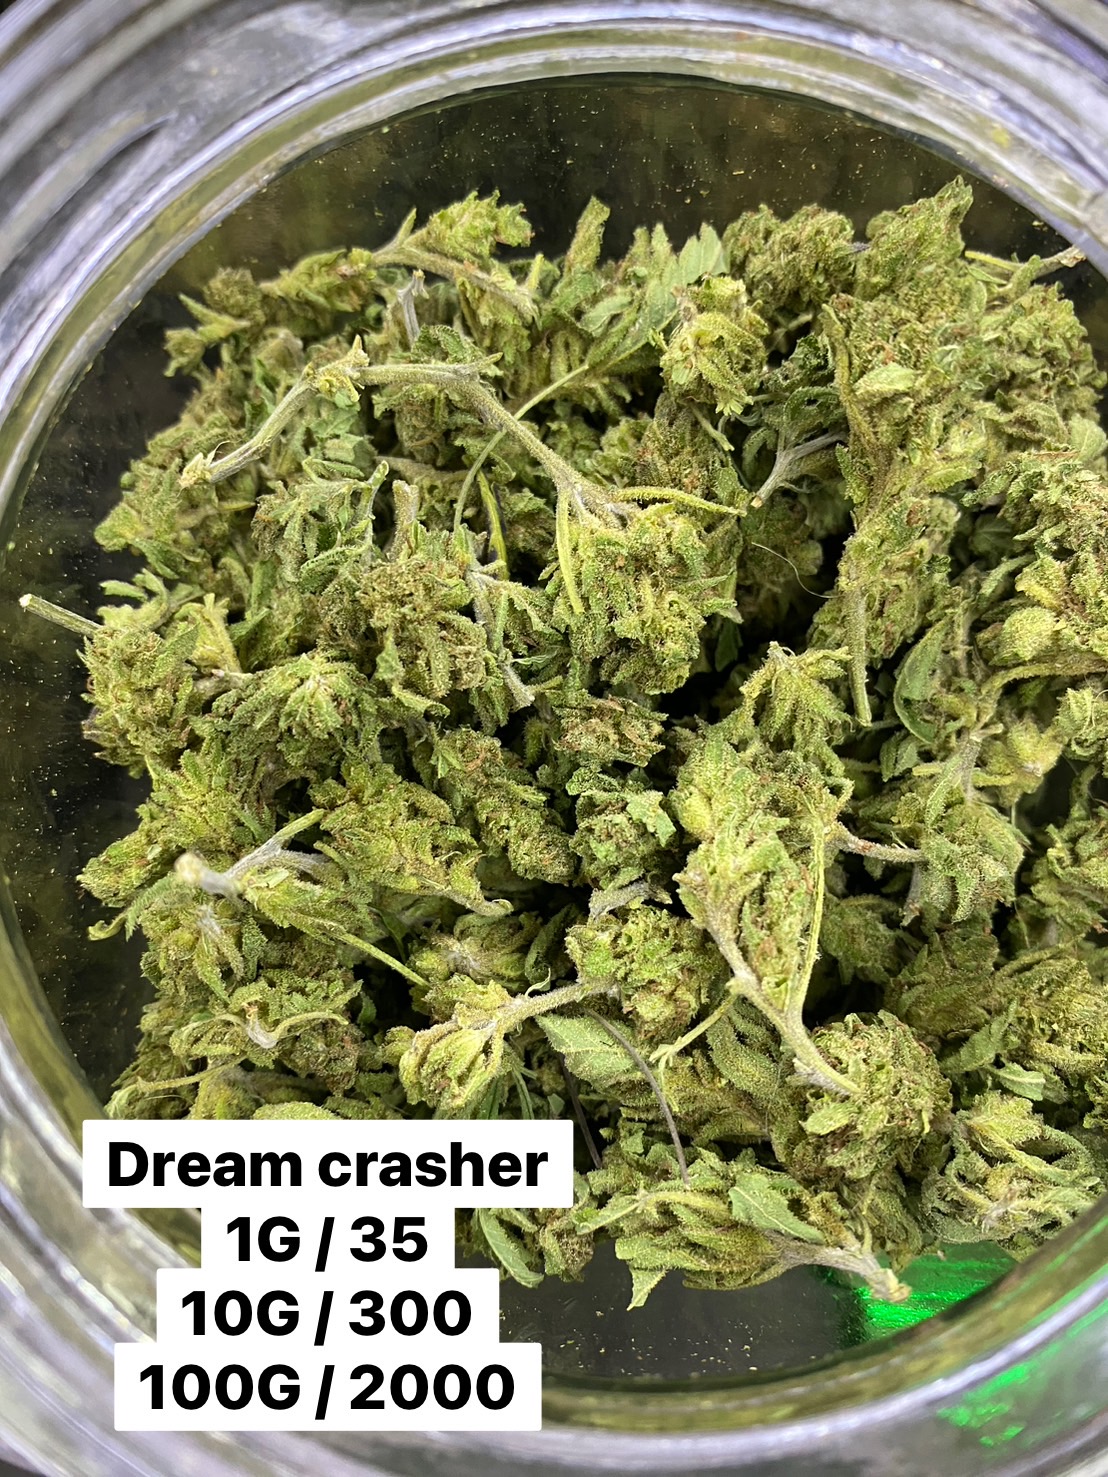 Product Image for Dream Crasher